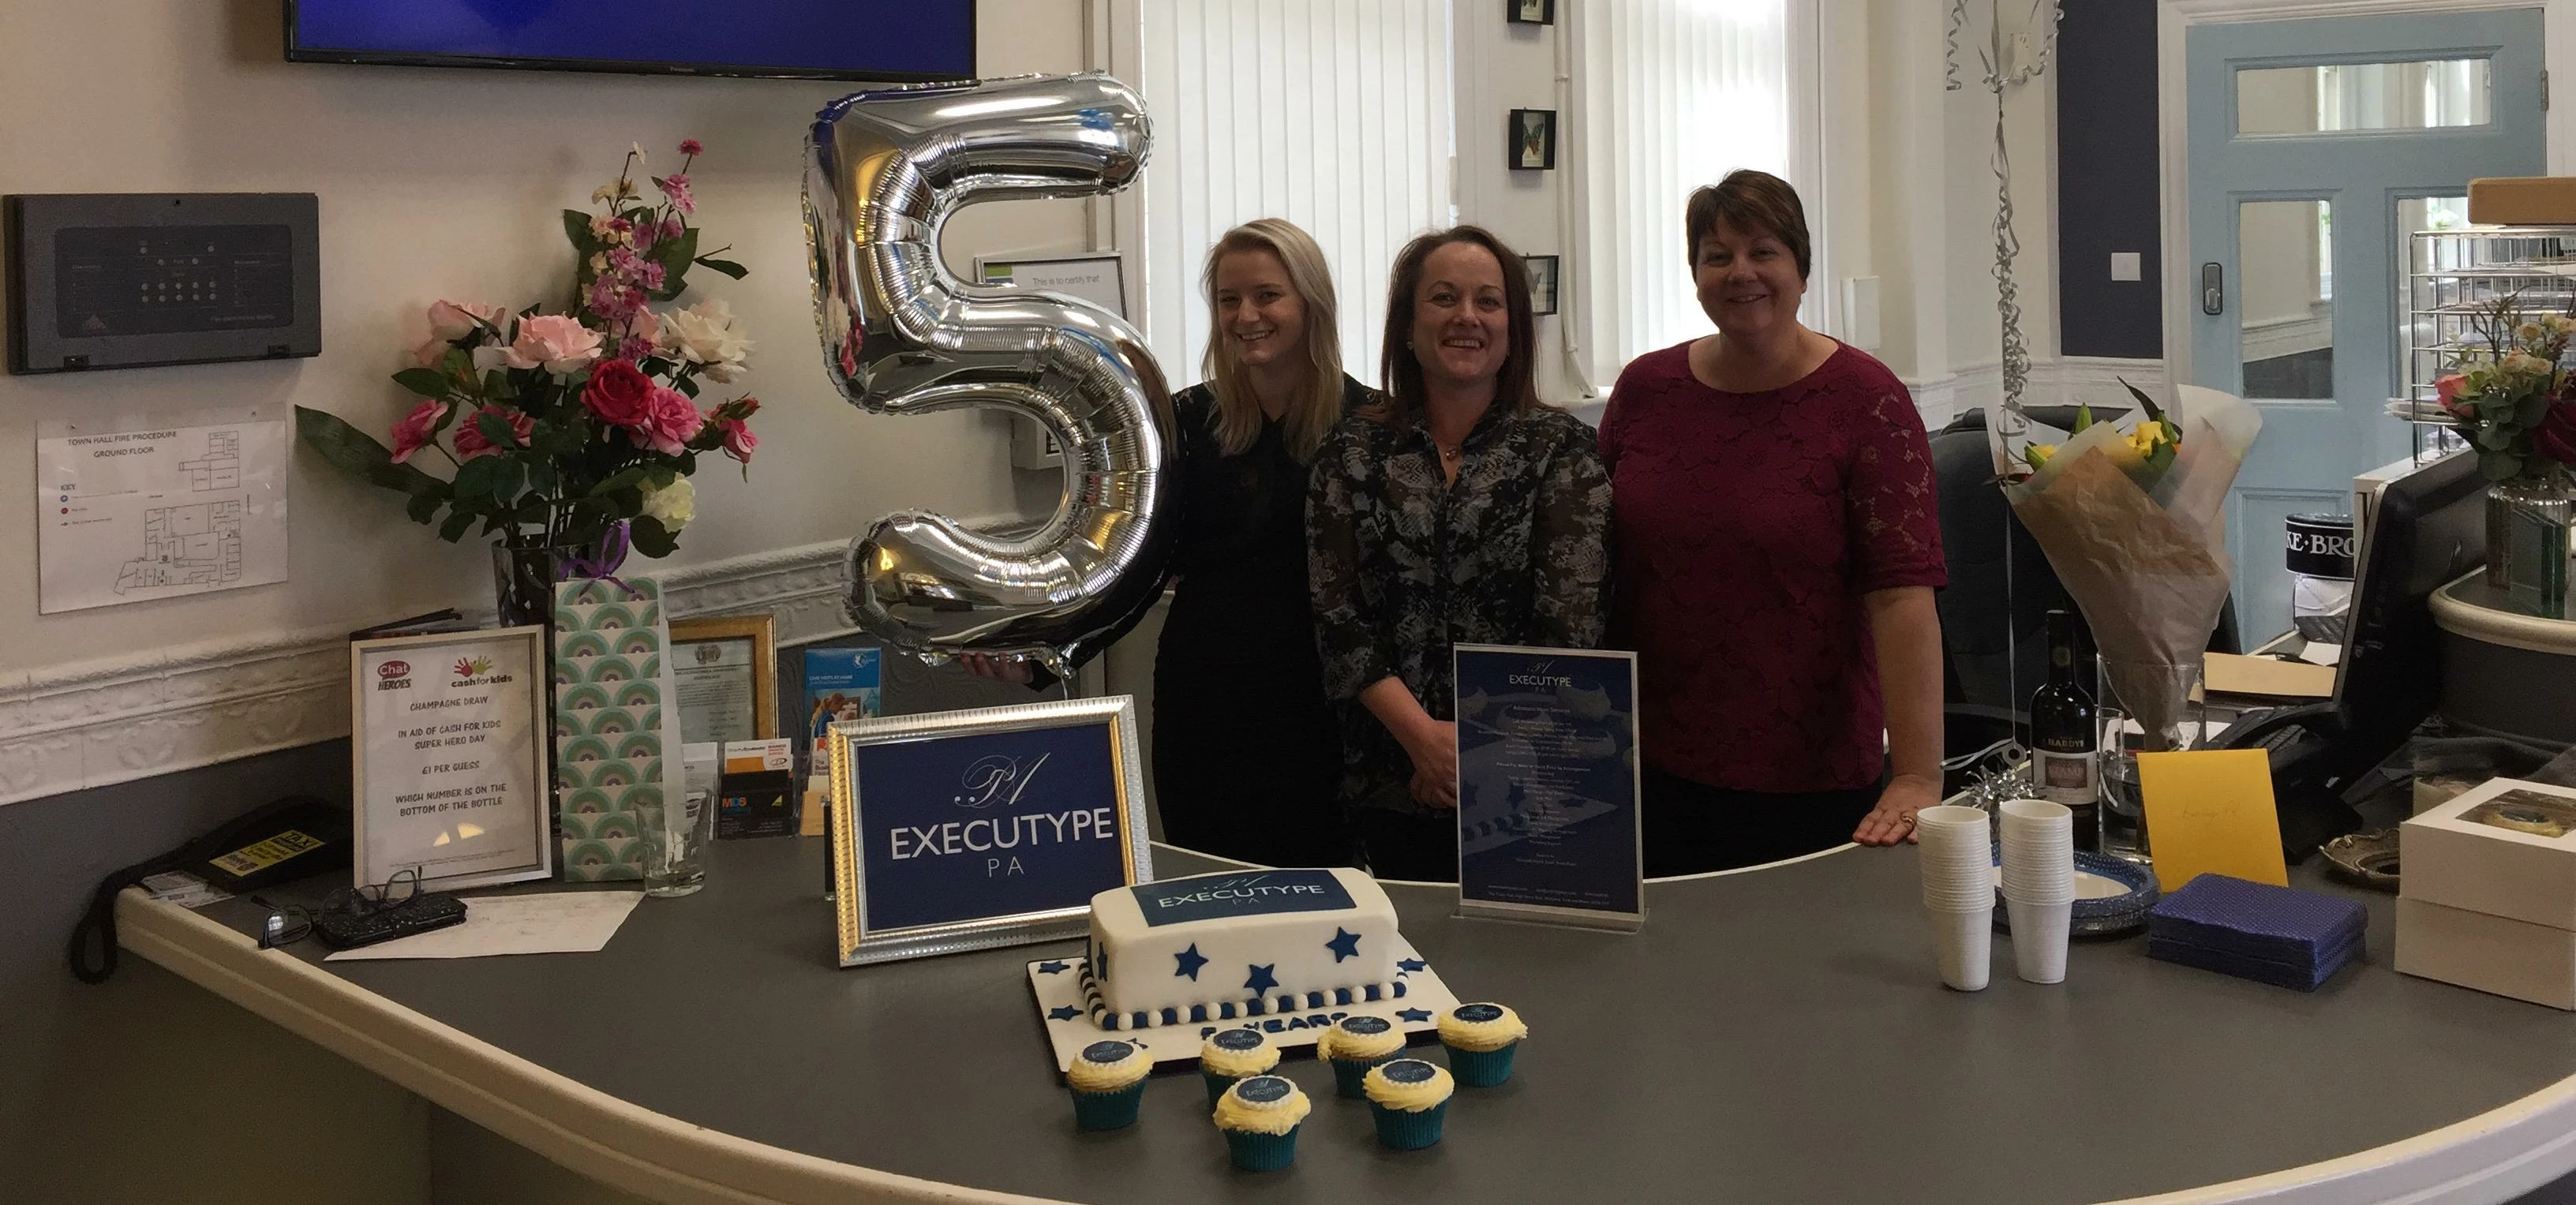 From left to right: Sarah Howells, Sharon Watson and Carol Charlton – the team at Executype PA Ltd c